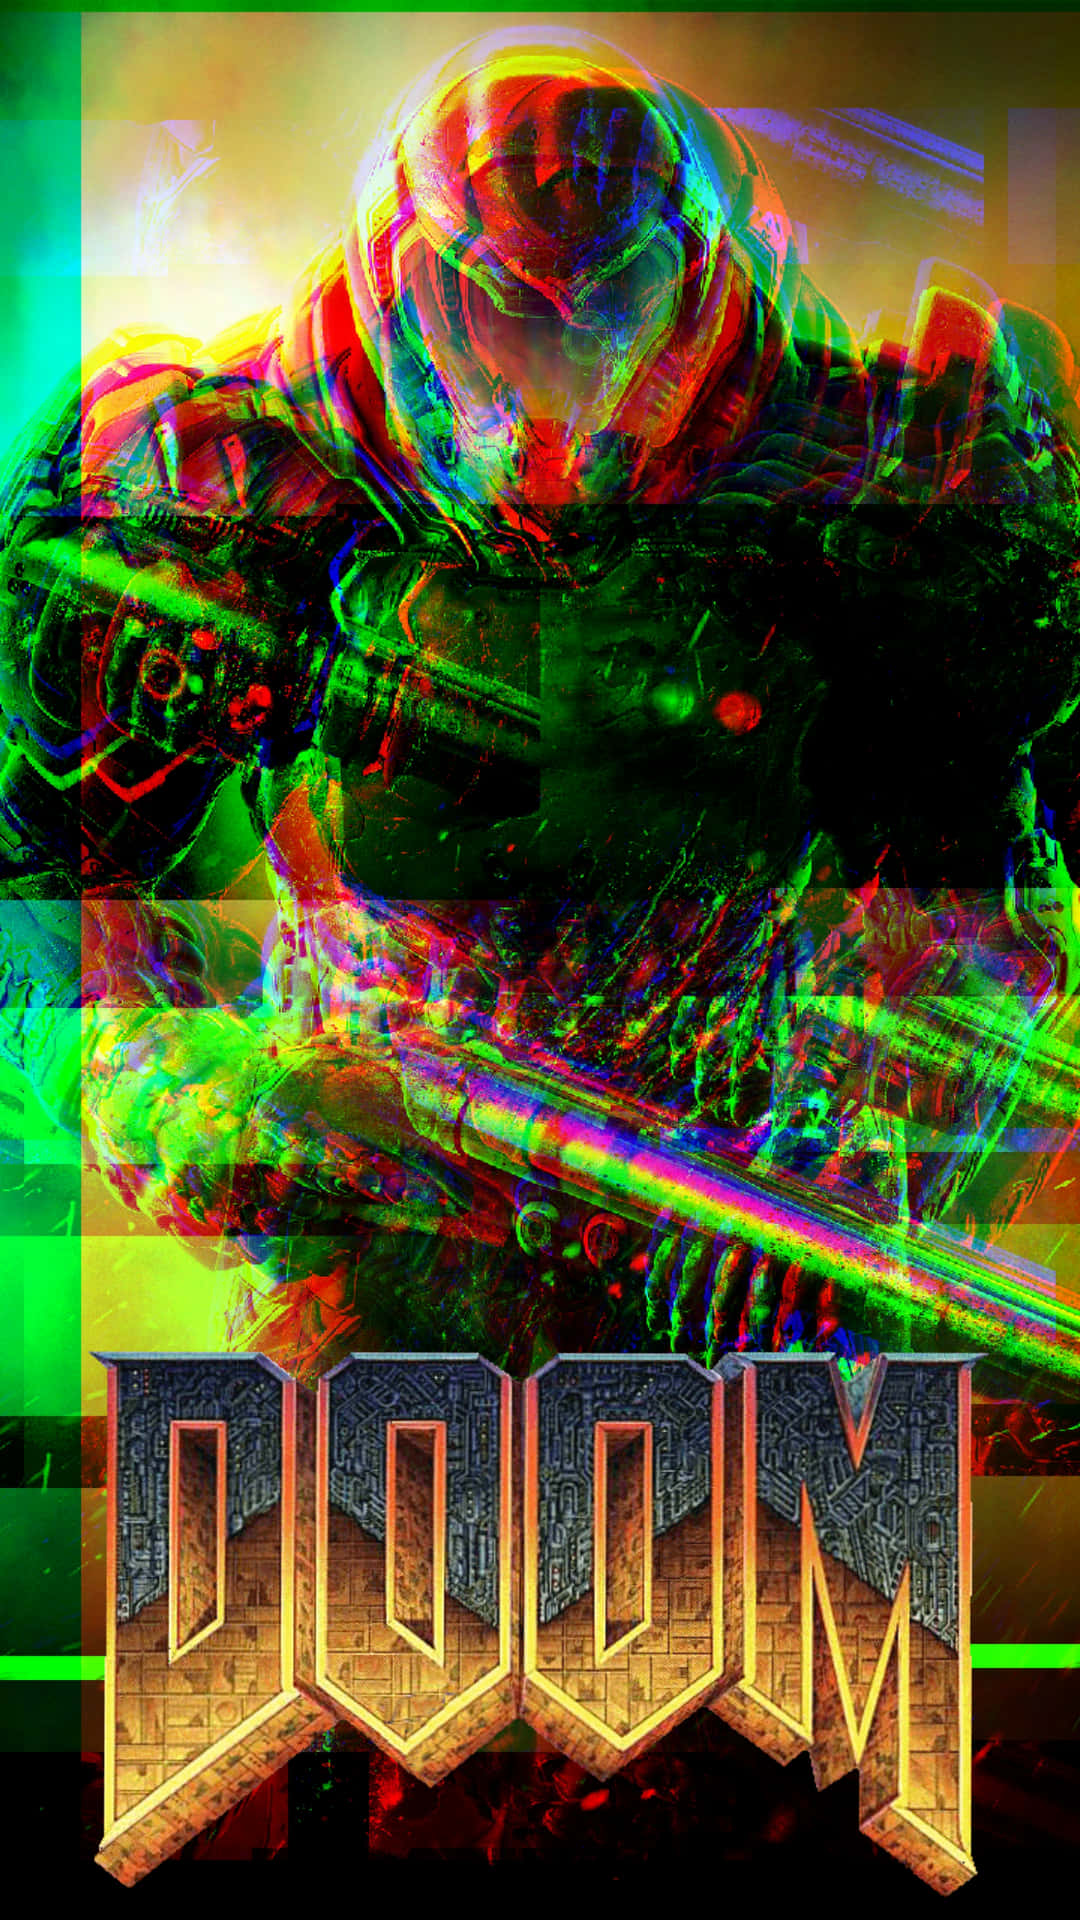 Doom - A Colorful Image Of A Man With A Gun